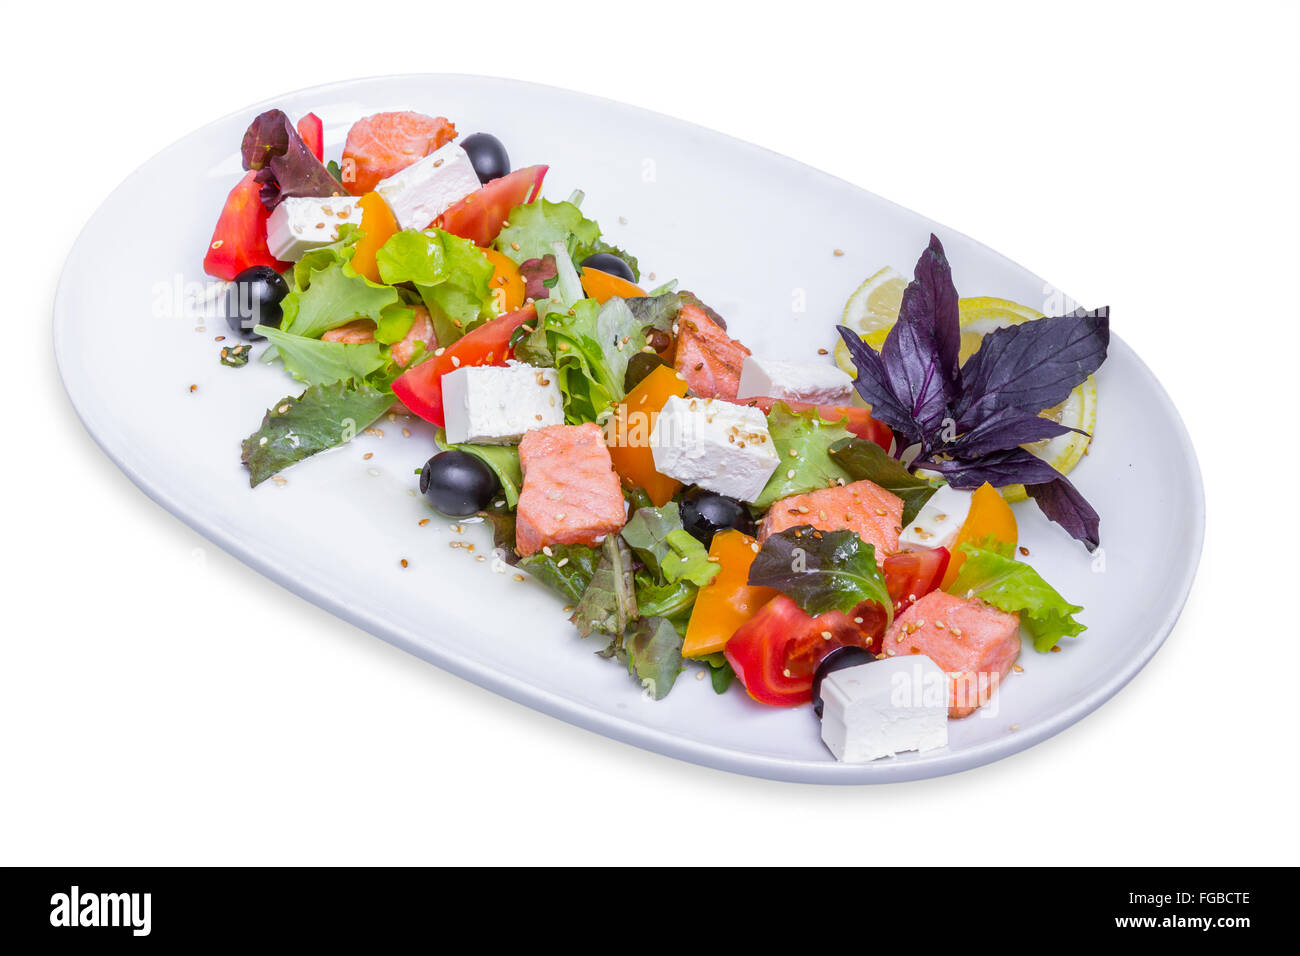 Salmon salad with feta cheese on white long plate, isolated with clipping path Stock Photo